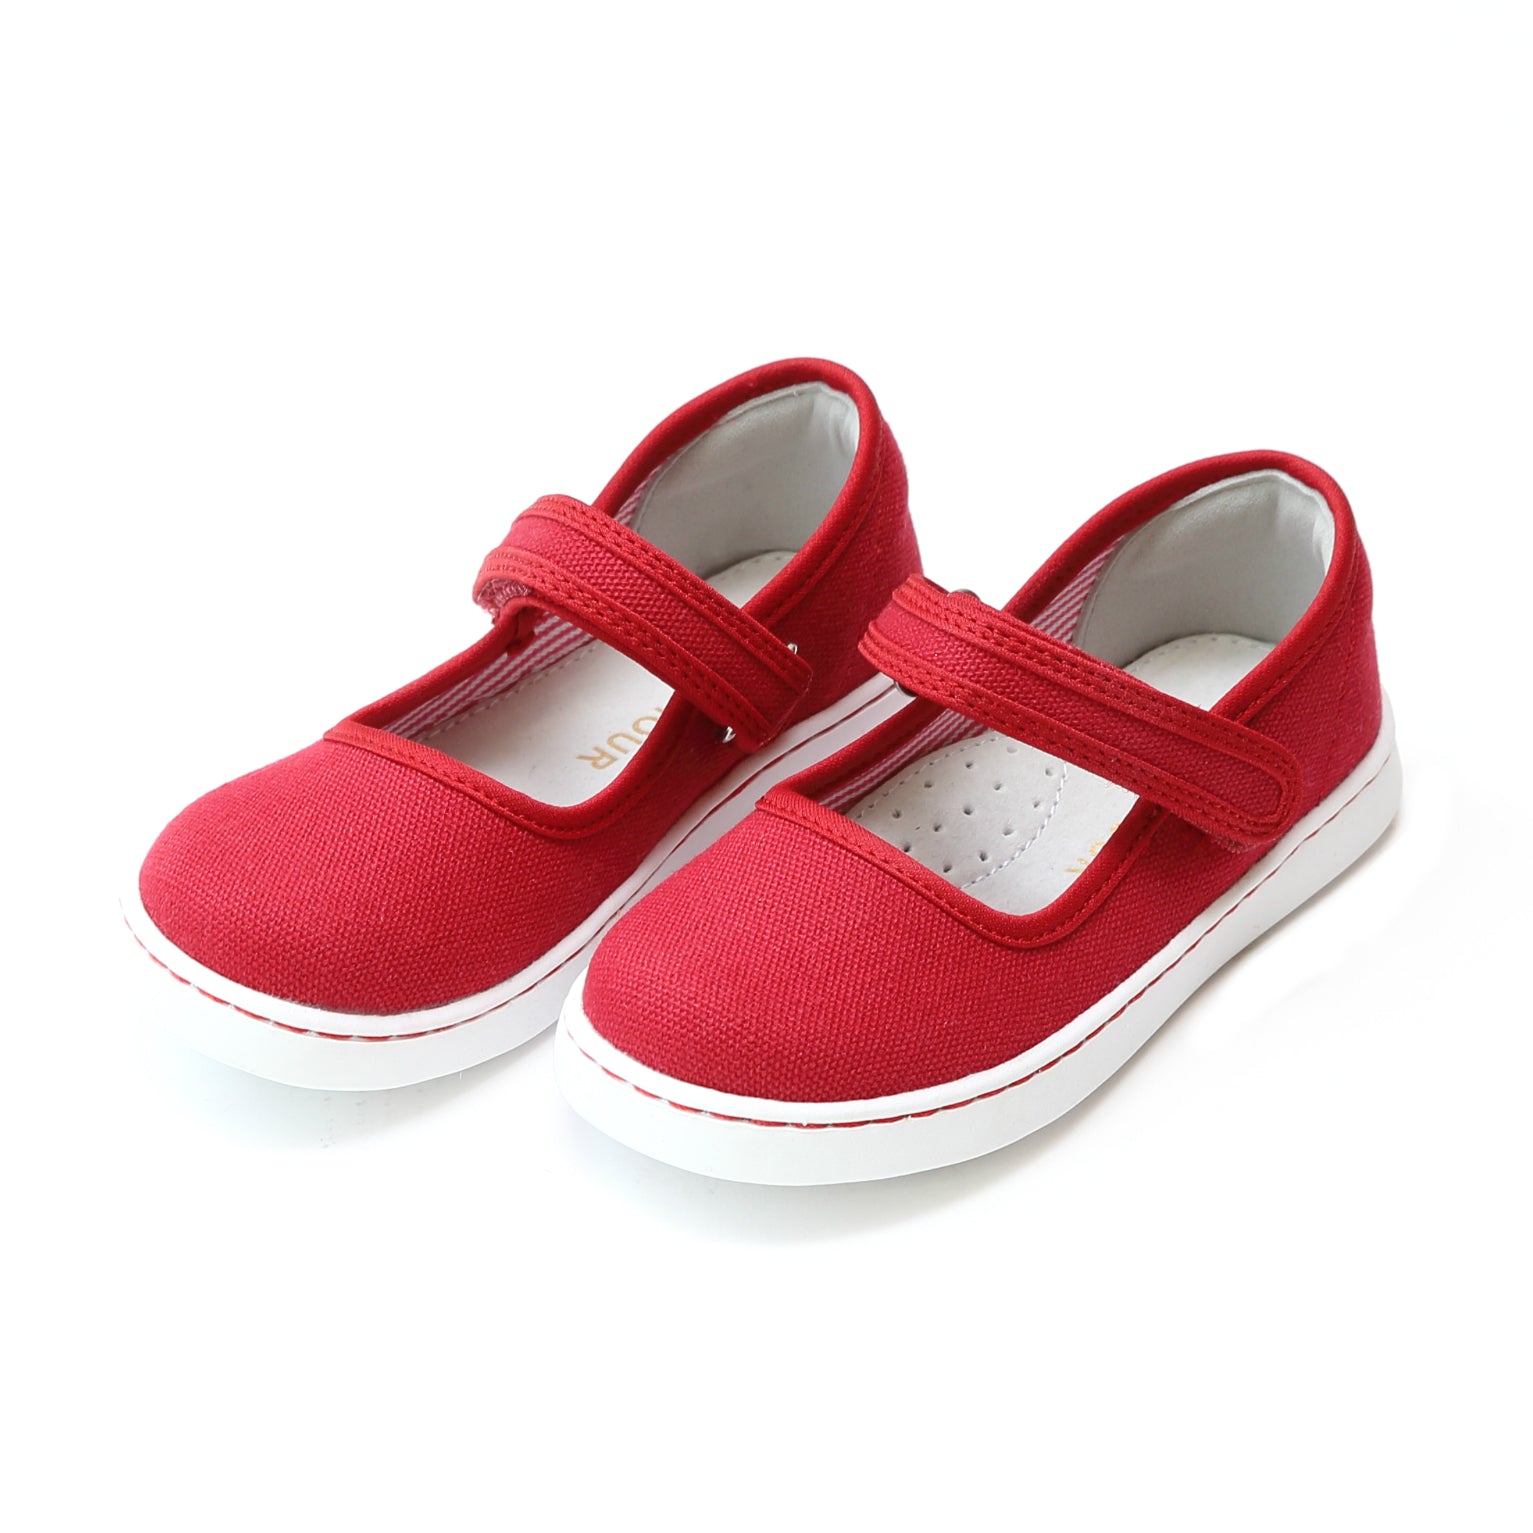 girls canvas mary jane shoes